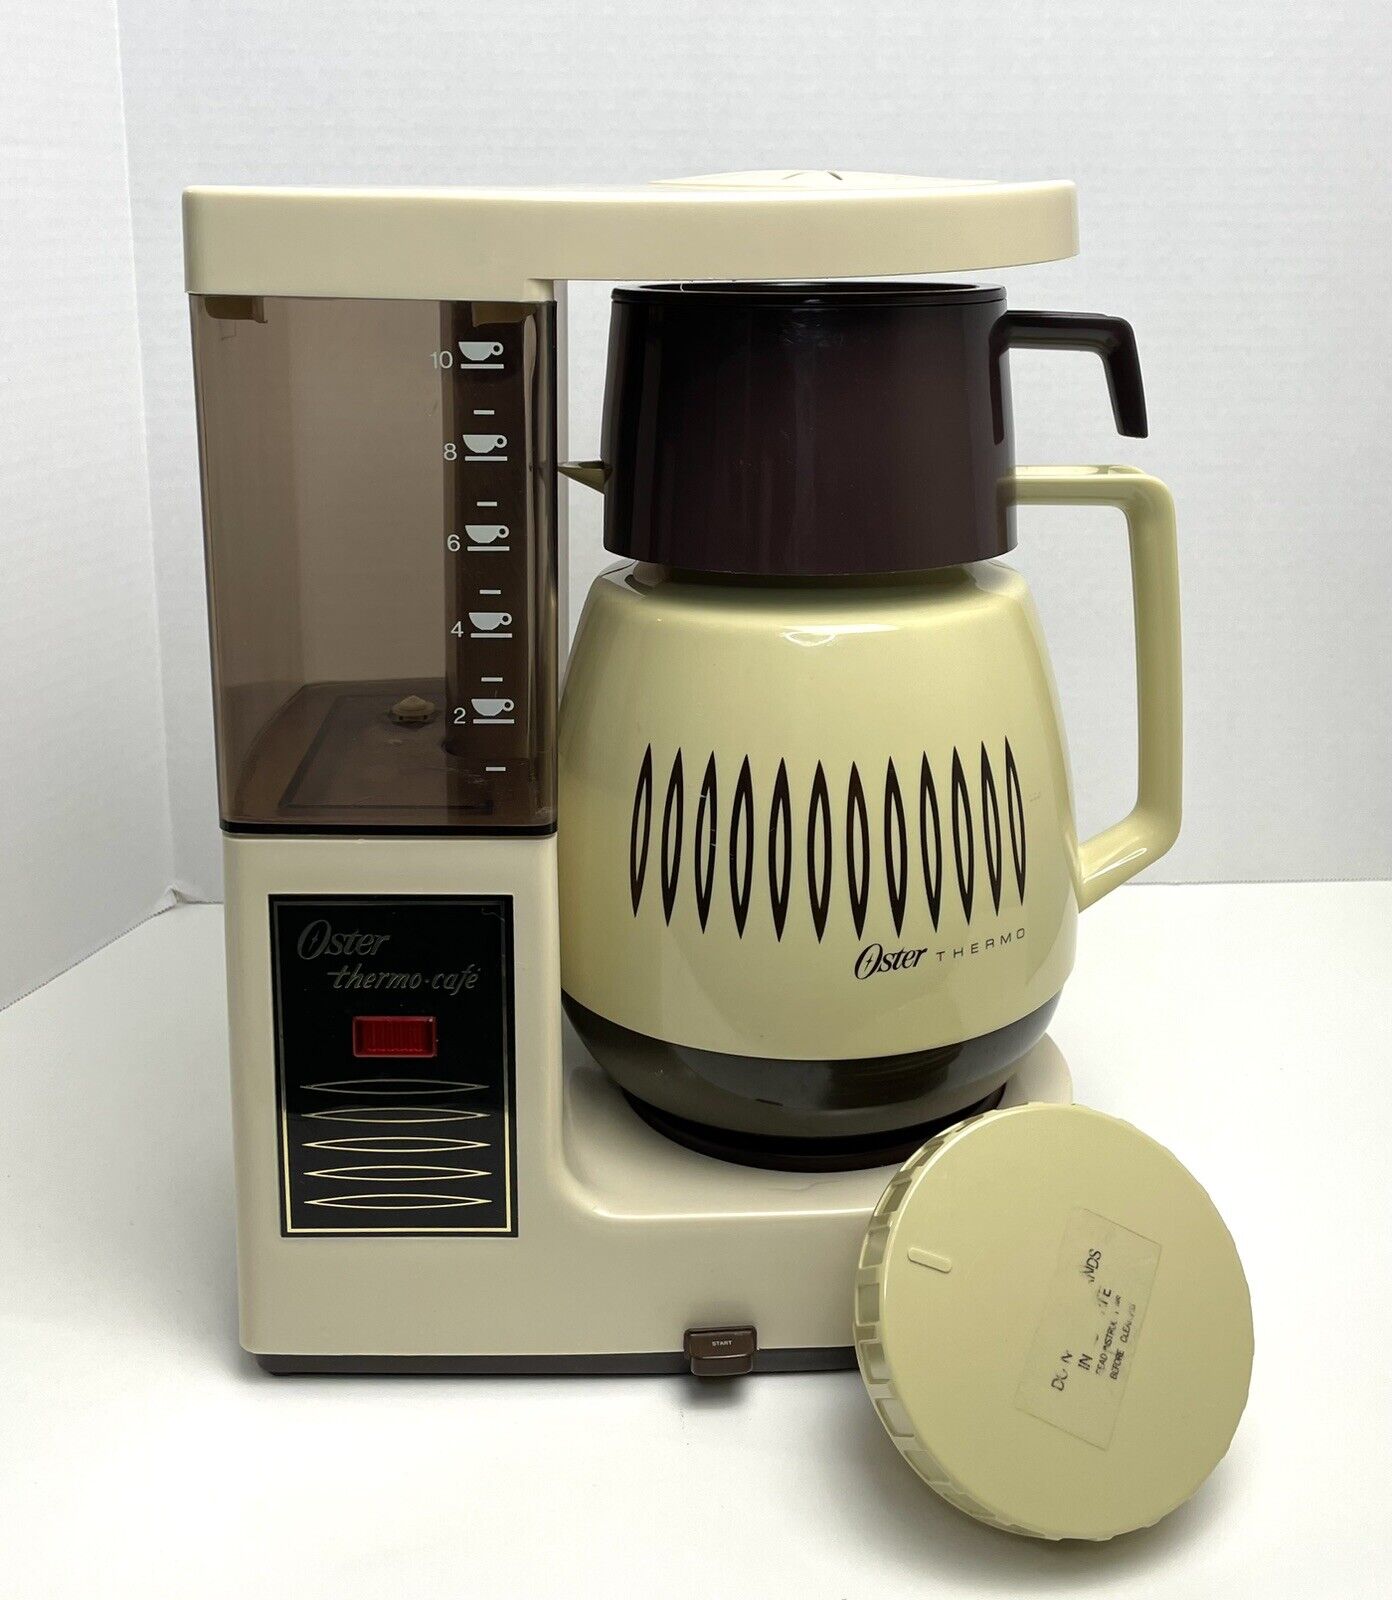 Vintage Oster Thermo-Cafe Insulated Coffee Maker Tested & Working